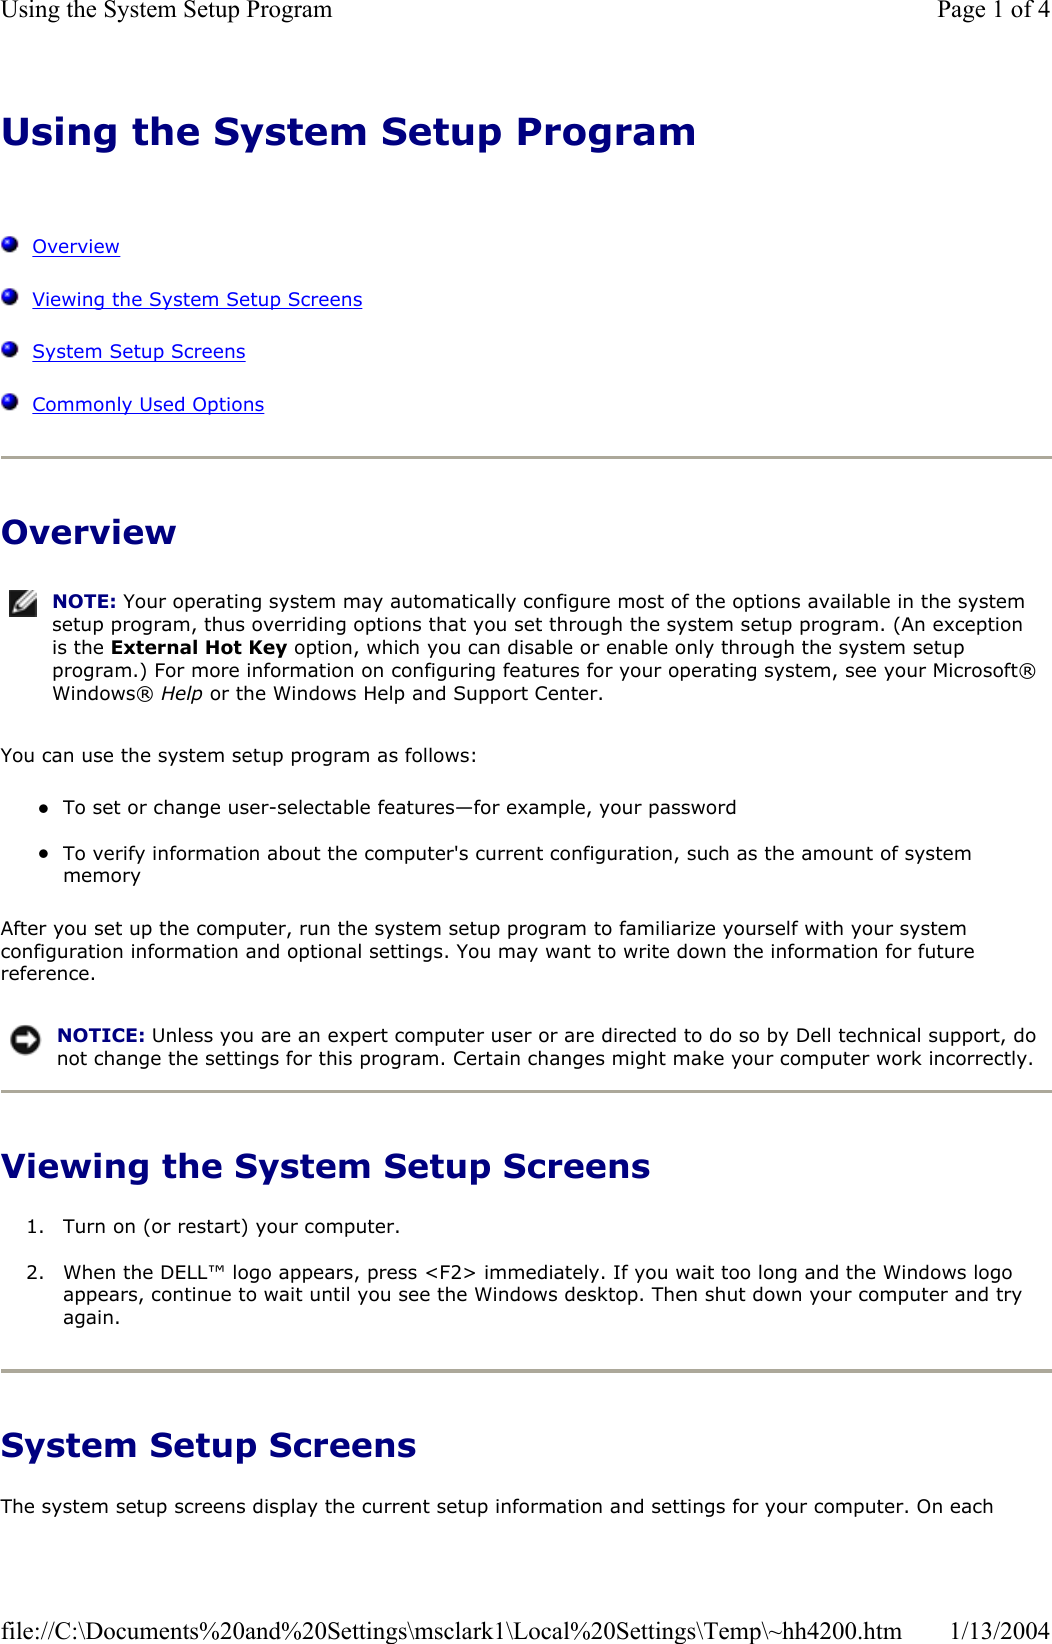 Using the System Setup ProgramOverviewViewing the System Setup ScreensSystem Setup ScreensCommonly Used OptionsOverview You can use the system setup program as follows: zTo set or change user-selectable features—for example, your password zTo verify information about the computer&apos;s current configuration, such as the amount of system memory After you set up the computer, run the system setup program to familiarize yourself with your system configuration information and optional settings. You may want to write down the information for future reference.Viewing the System Setup Screens 1. Turn on (or restart) your computer. 2. When the DELL™ logo appears, press &lt;F2&gt; immediately. If you wait too long and the Windows logo appears, continue to wait until you see the Windows desktop. Then shut down your computer and try again.System Setup Screens The system setup screens display the current setup information and settings for your computer. On each NOTE: Your operating system may automatically configure most of the options available in the system setup program, thus overriding options that you set through the system setup program. (An exception is the External Hot Key option, which you can disable or enable only through the system setup program.) For more information on configuring features for your operating system, see your Microsoft® Windows® Help or the Windows Help and Support Center.NOTICE: Unless you are an expert computer user or are directed to do so by Dell technical support, do not change the settings for this program. Certain changes might make your computer work incorrectly. Page 1 of 4Using the System Setup Program1/13/2004file://C:\Documents%20and%20Settings\msclark1\Local%20Settings\Temp\~hh4200.htm